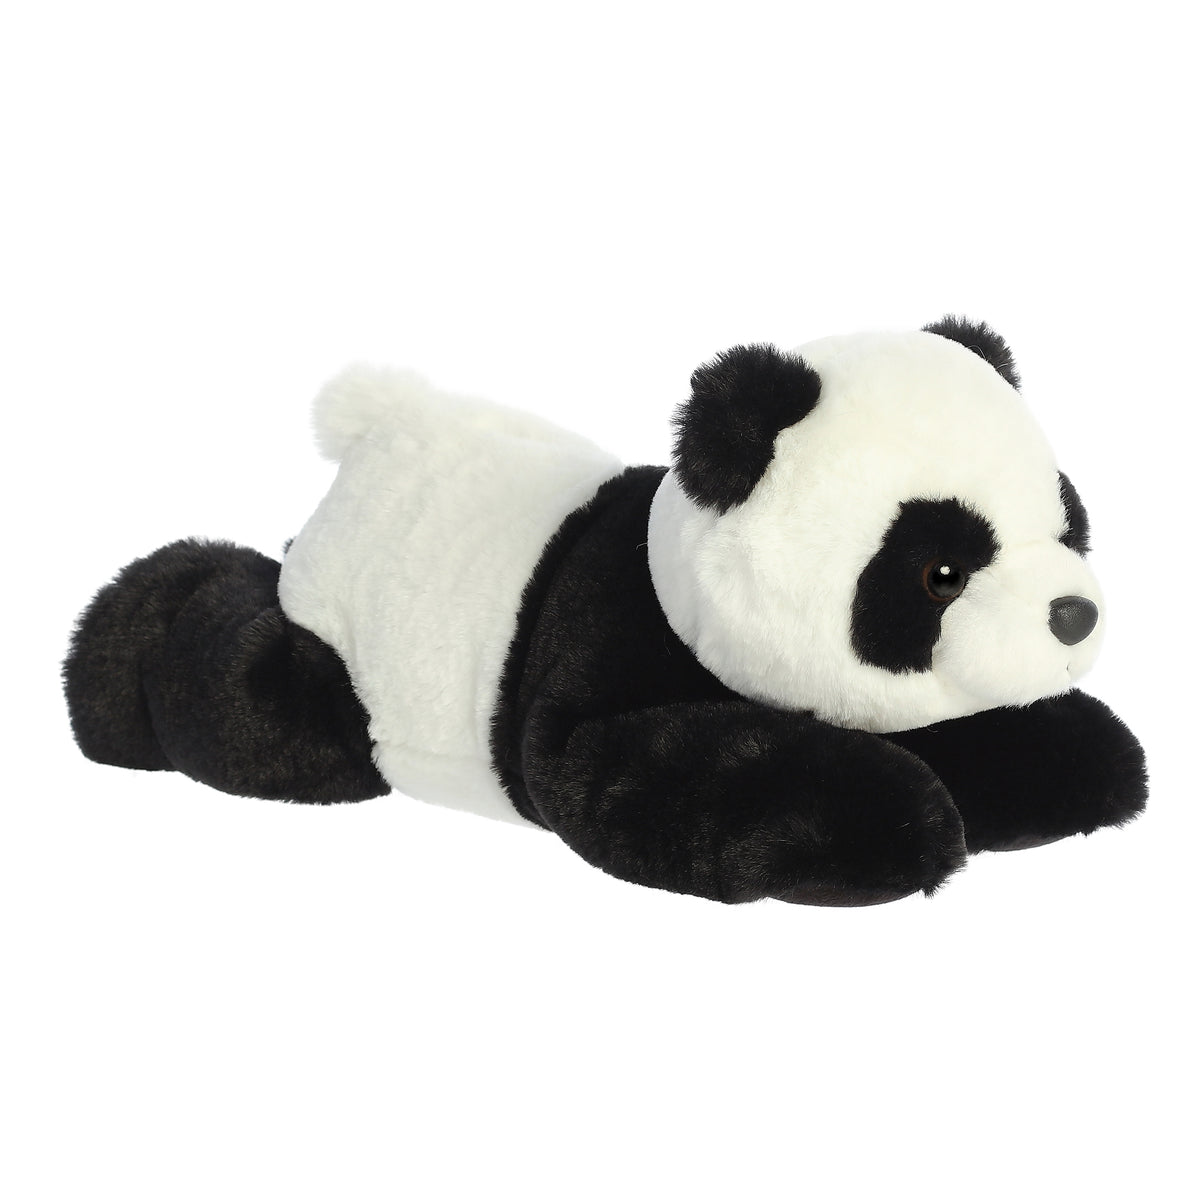 Classic black and white Bei Bei panda plushie in a resting pose, with fluffy black and white fur like its counterpart.